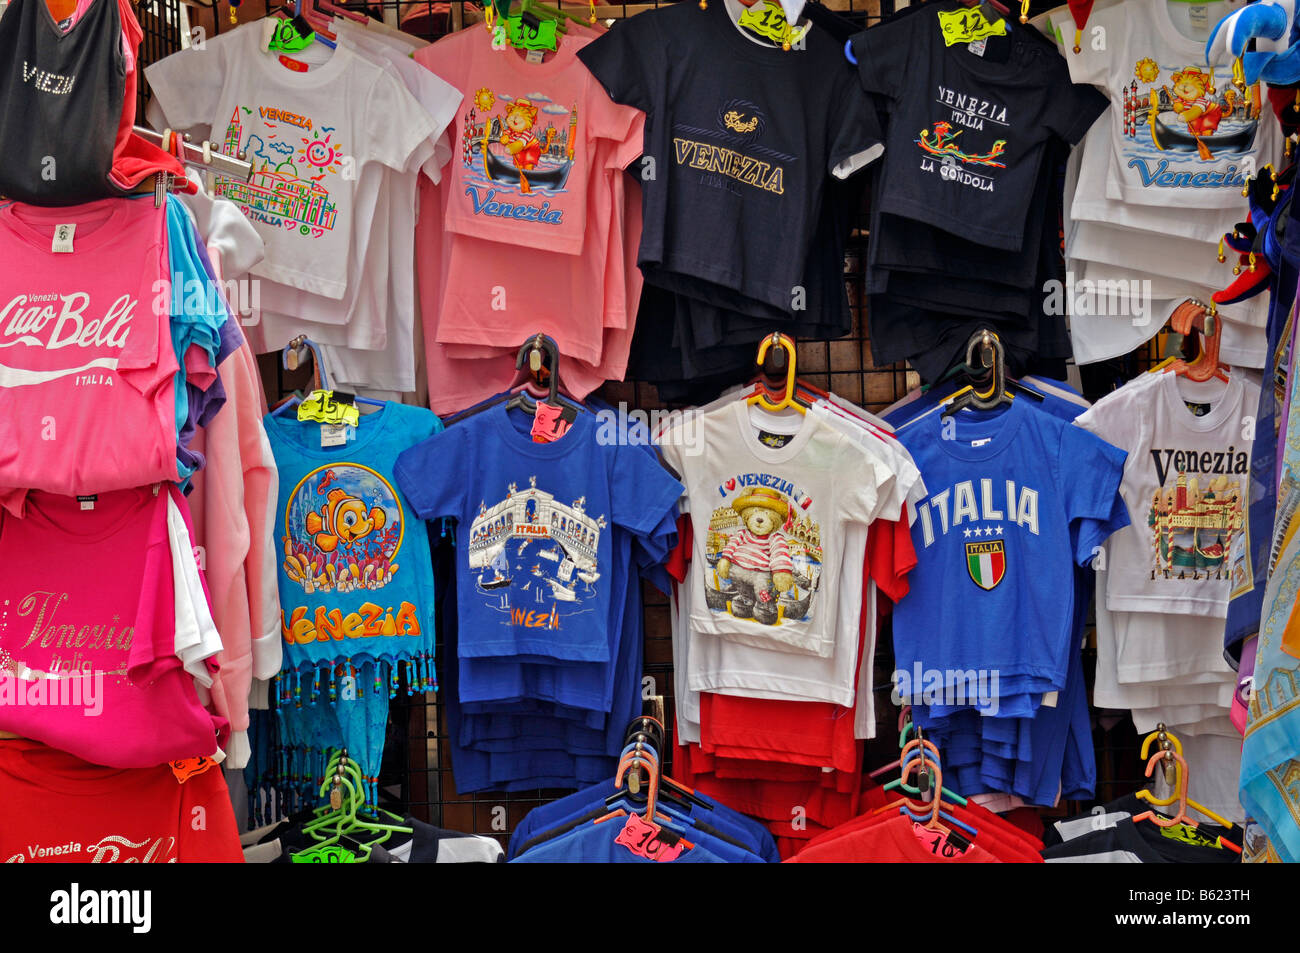 T-shirts at a sales booth, street sale, Venice, Italy, Europe Stock Photo